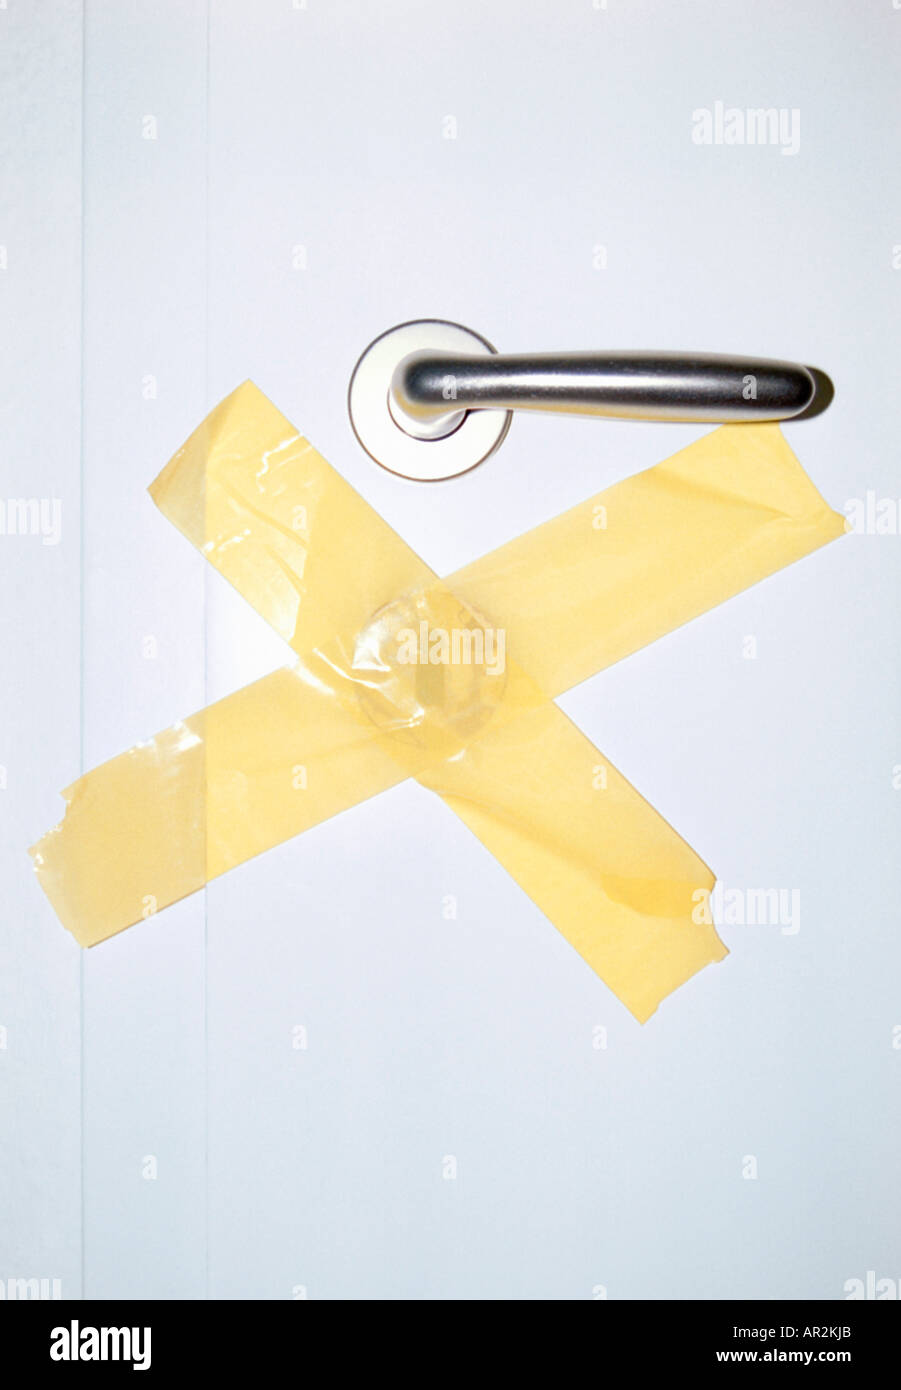 Door with lock covered by adhesive tape Stock Photo